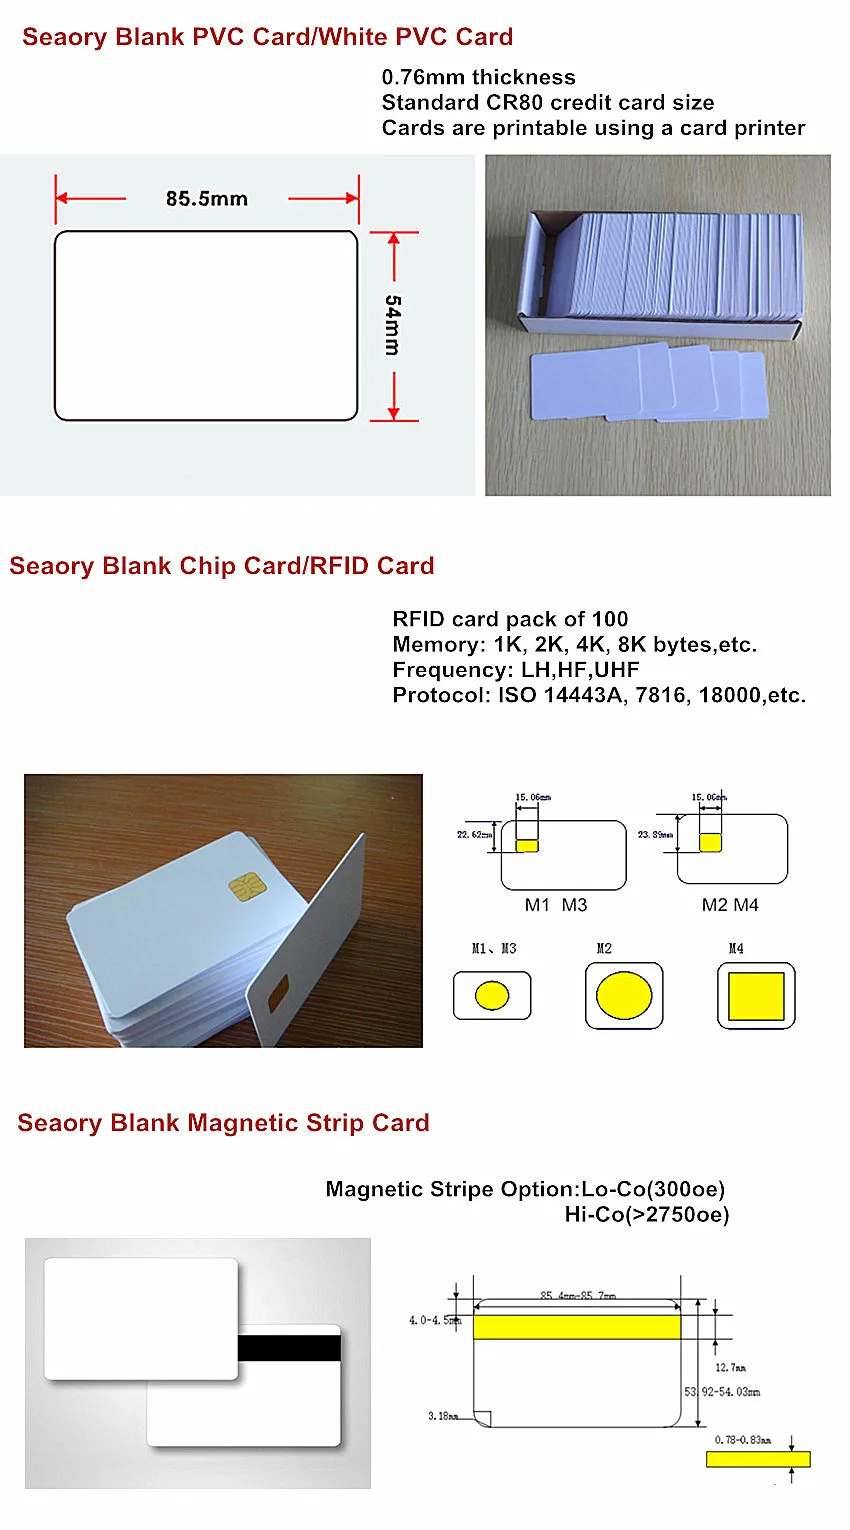 Glossy surface plastic Contact IC Smart Card Frosted RFID card